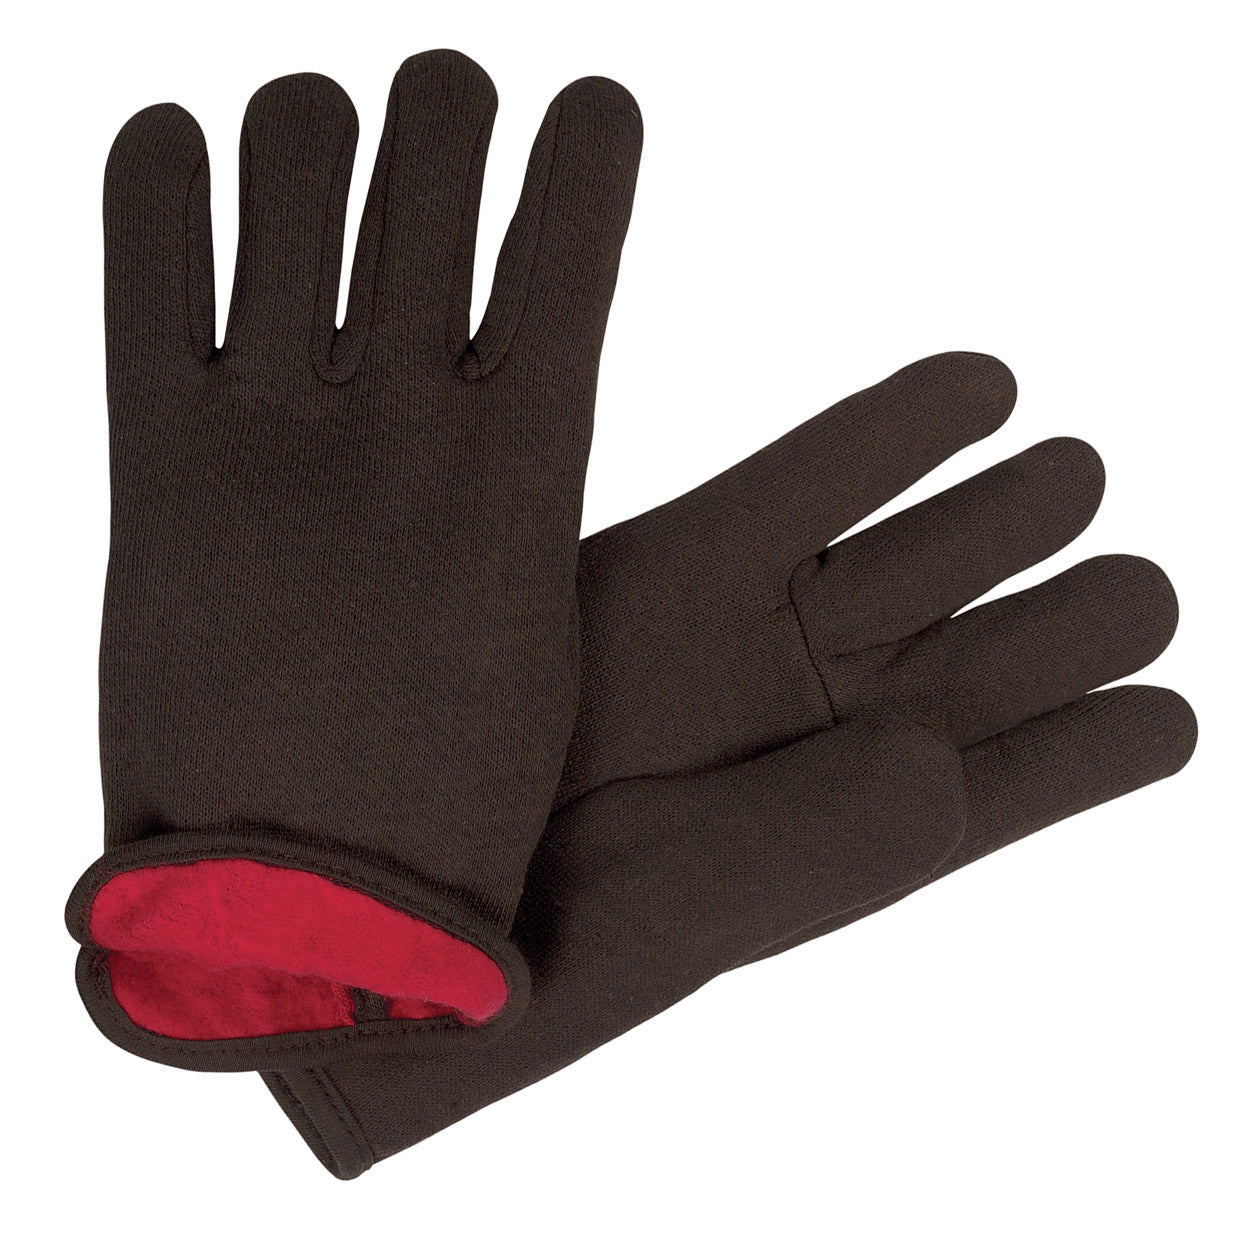 Red Lined Cotton Jersey Gloves, 7900